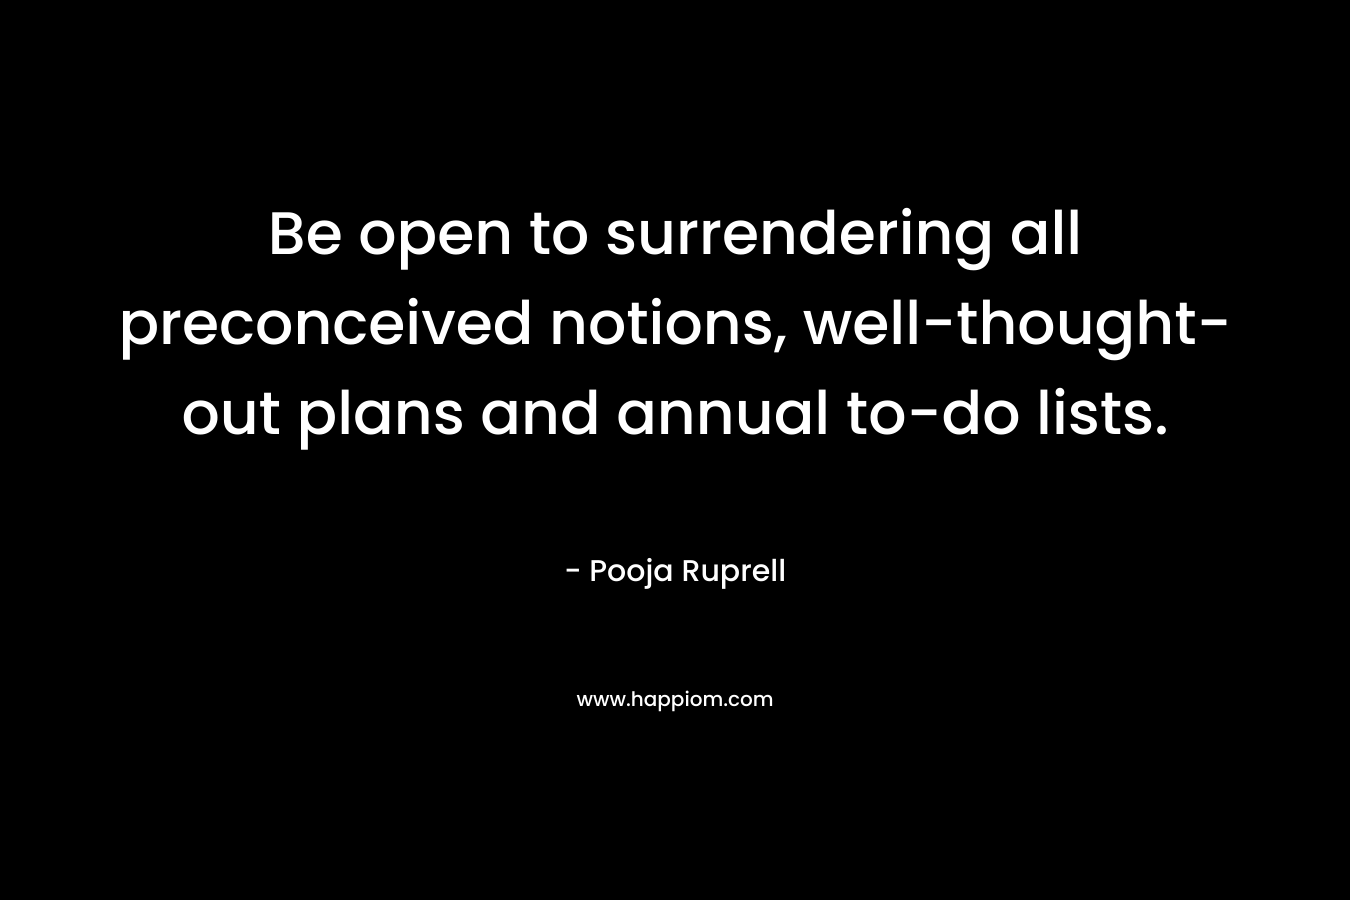 Be open to surrendering all preconceived notions, well-thought-out plans and annual to-do lists.